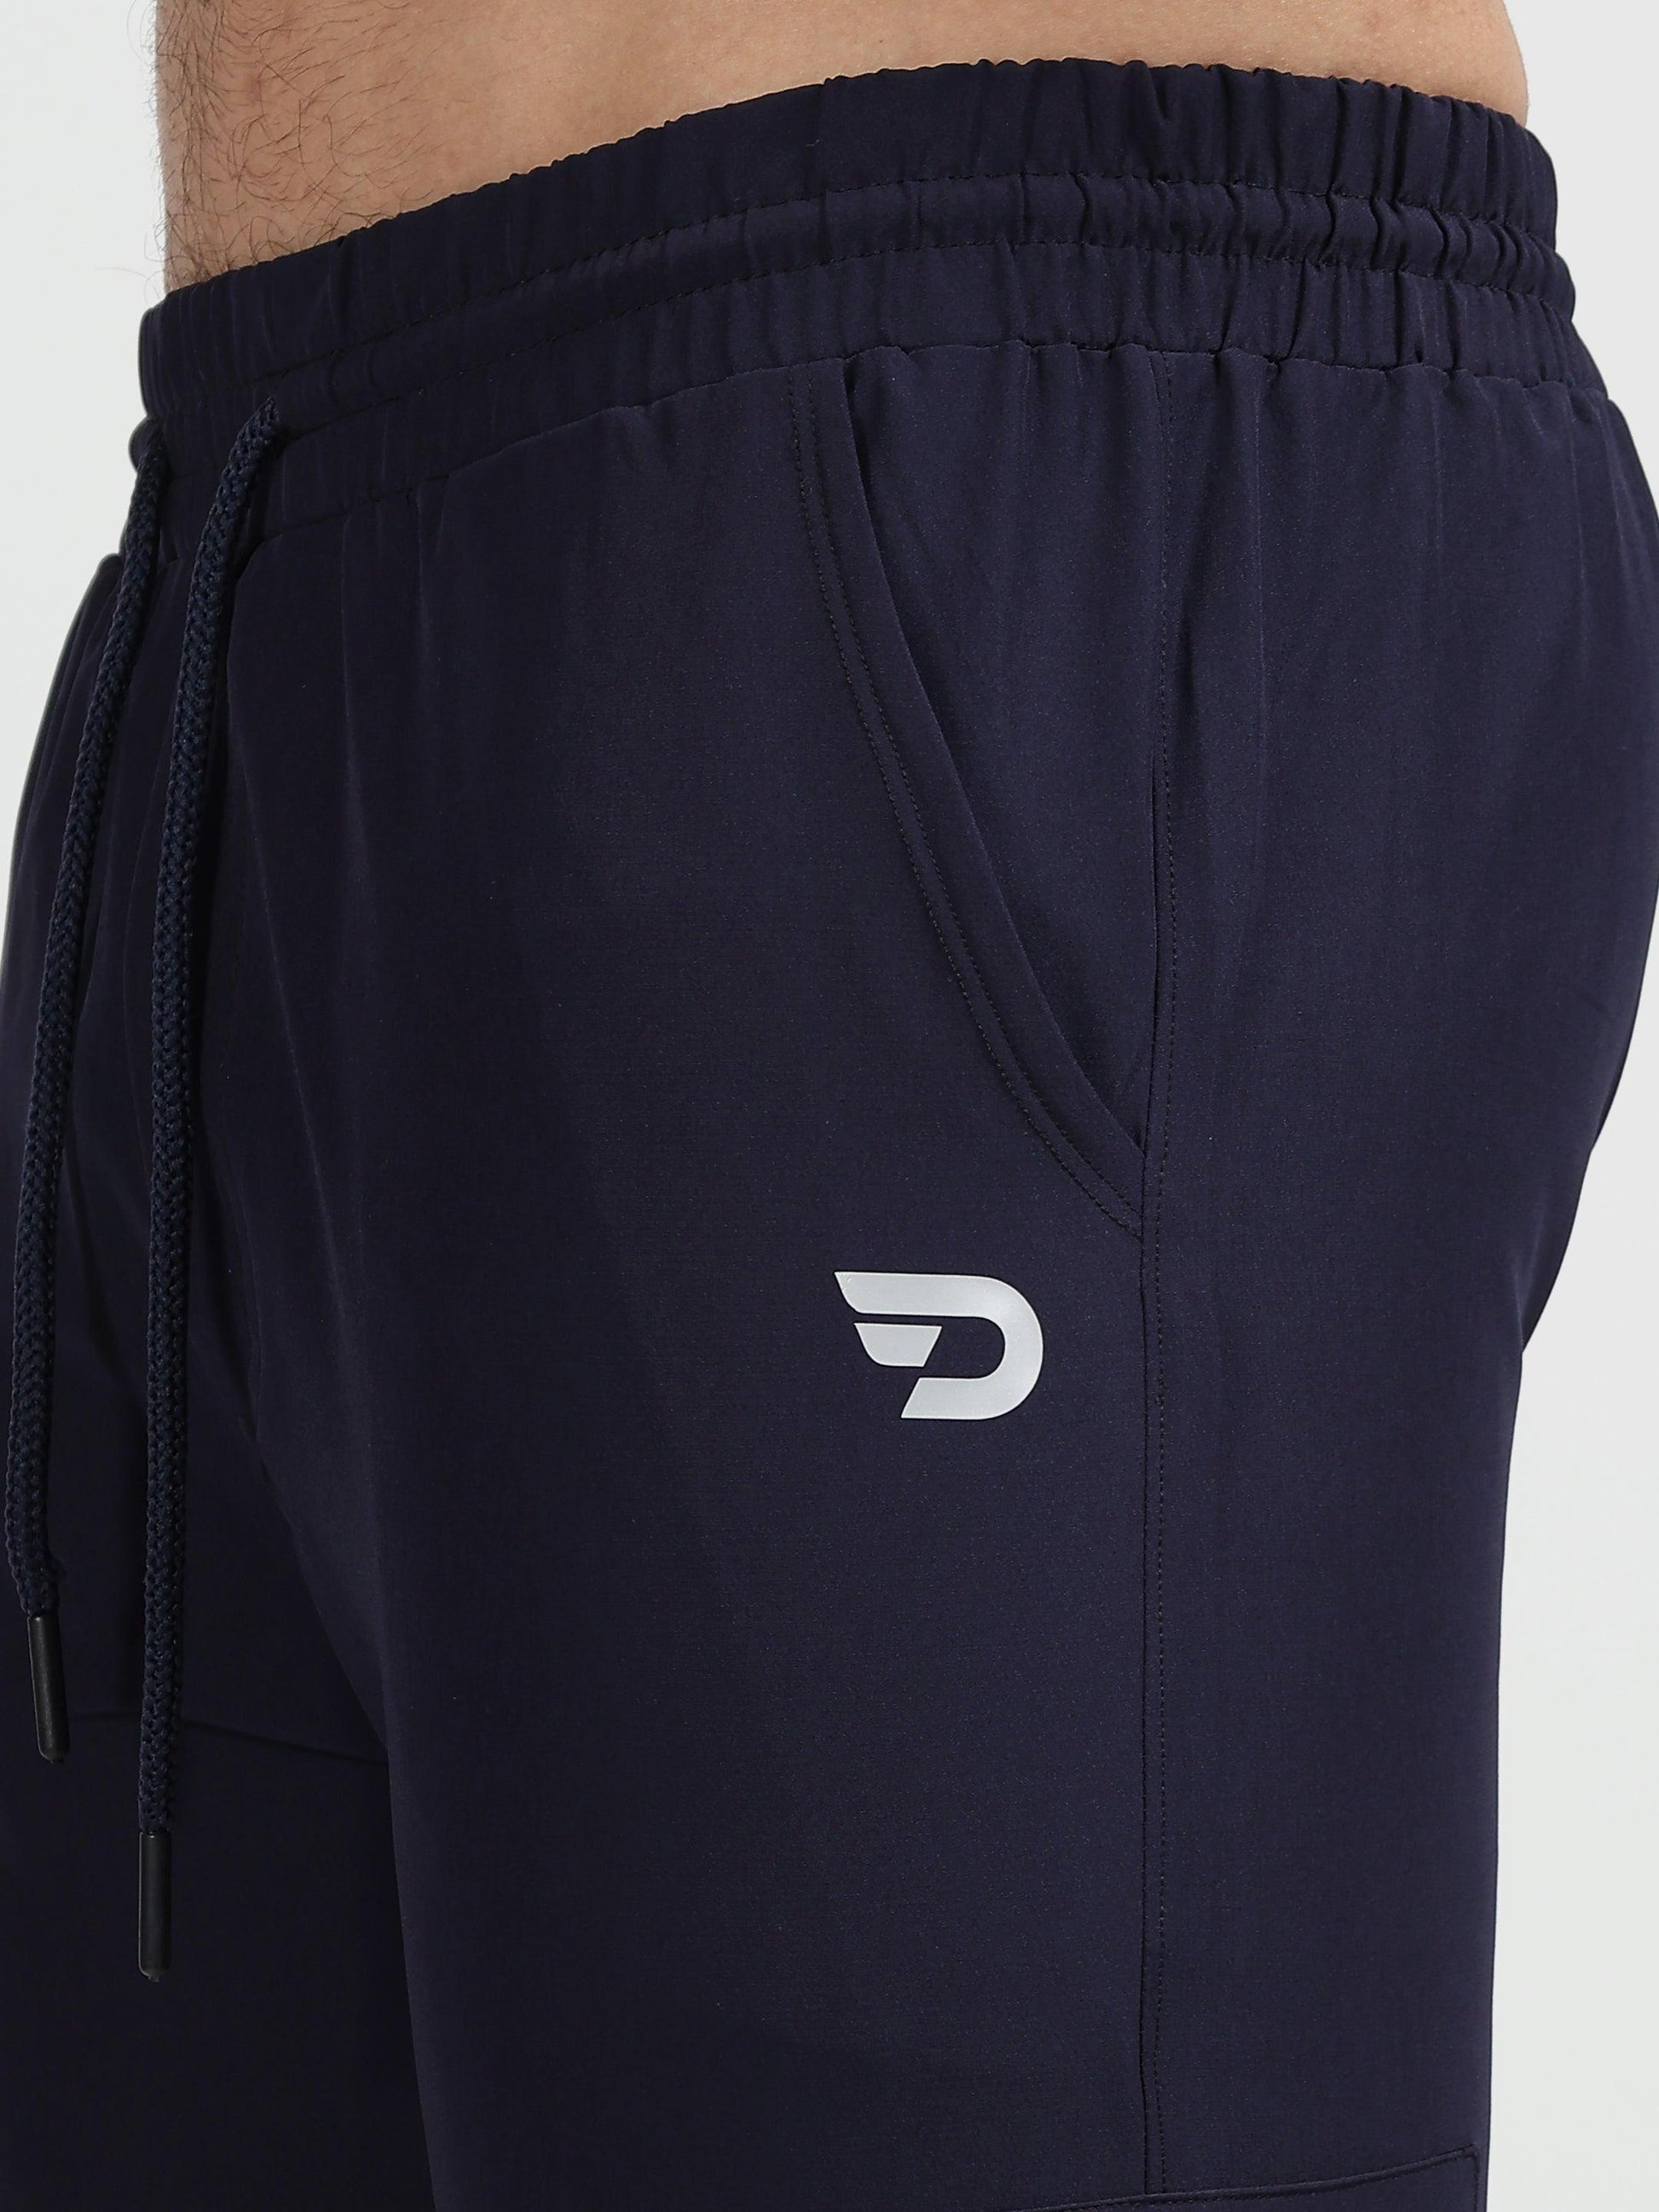 Denmonk: Elevate your look with these Treckcrago sharp midnight navy Trackpant for mens.